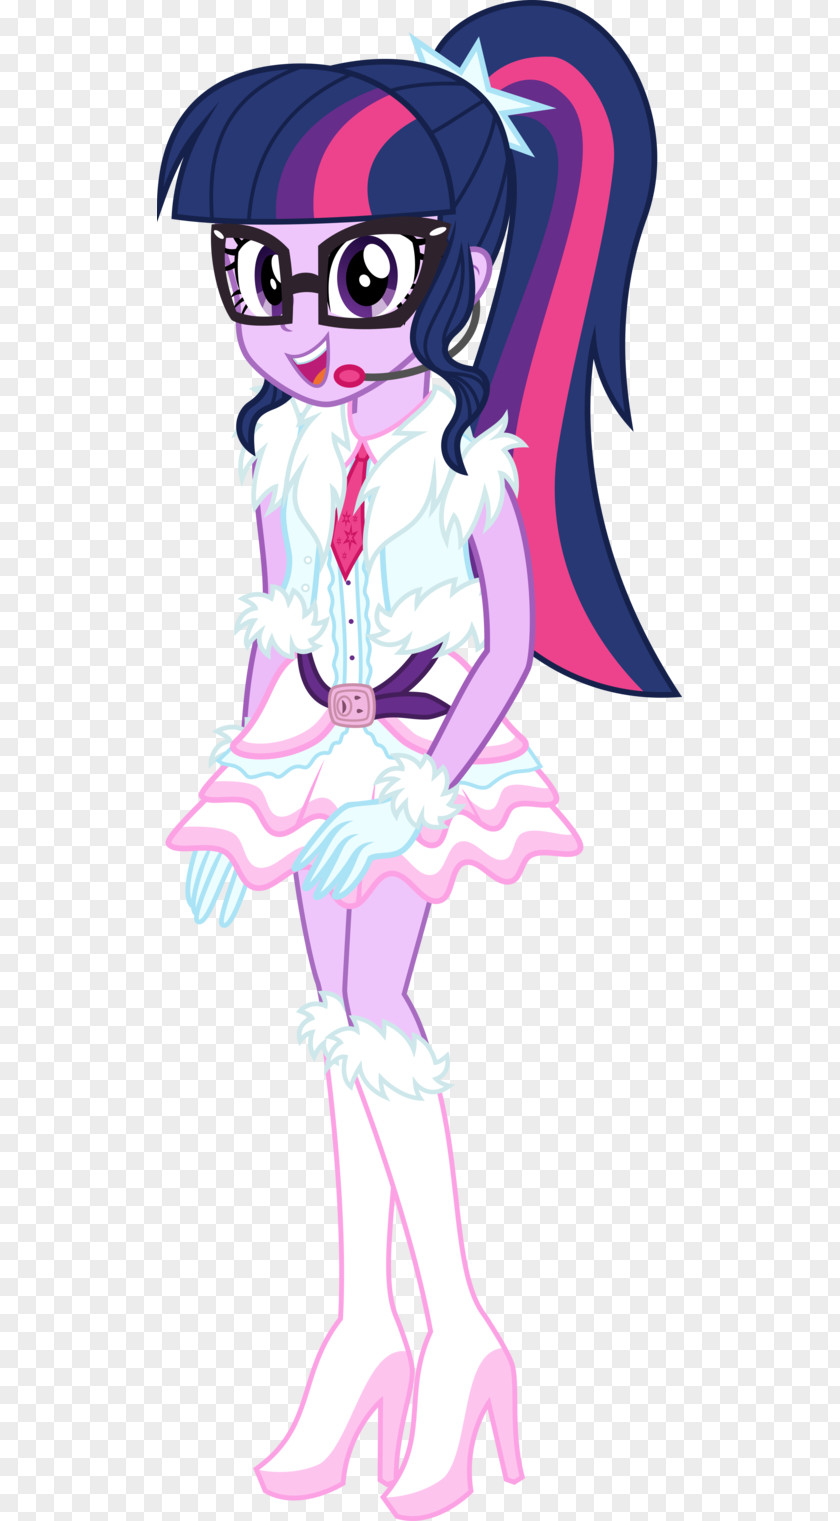 My Little Pony Twilight Sparkle Sunset Shimmer Pony: Equestria Girls PNG